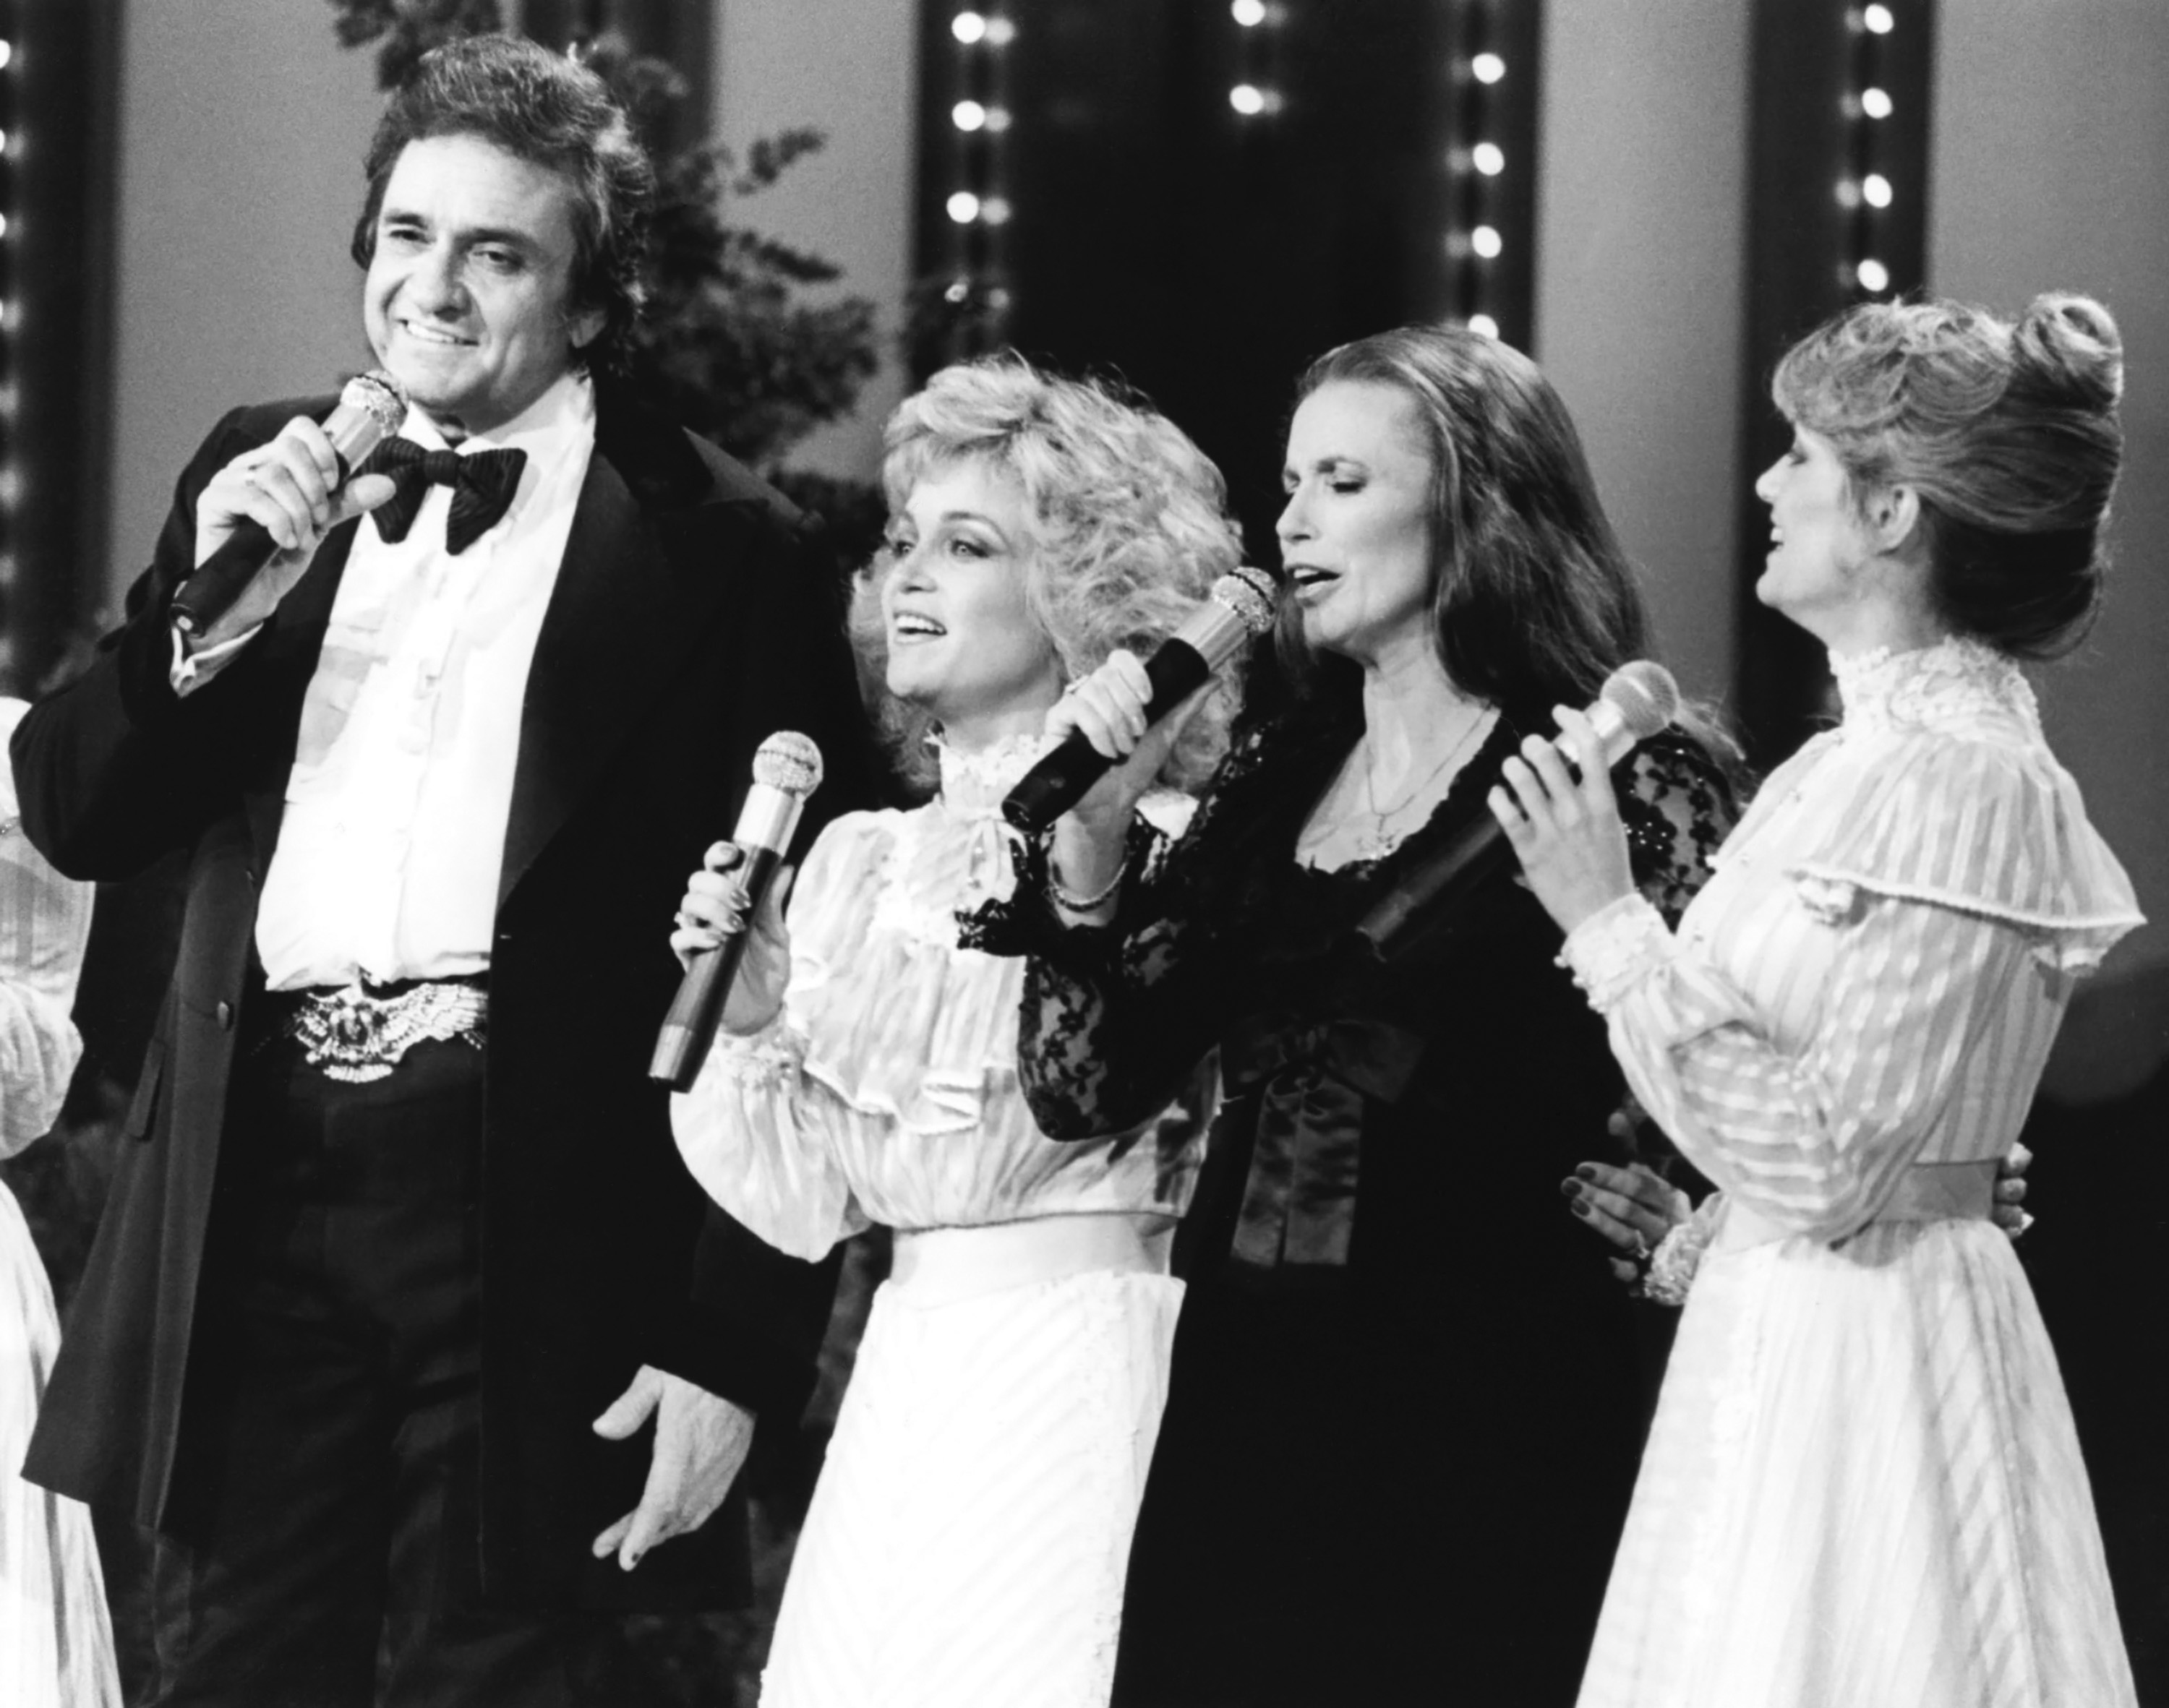 Johnny Cash, Barbara Mandrell, June Carter Cash, Irlene Mandrell, and Louise Mandrell in 1980 | Source: Getty Images